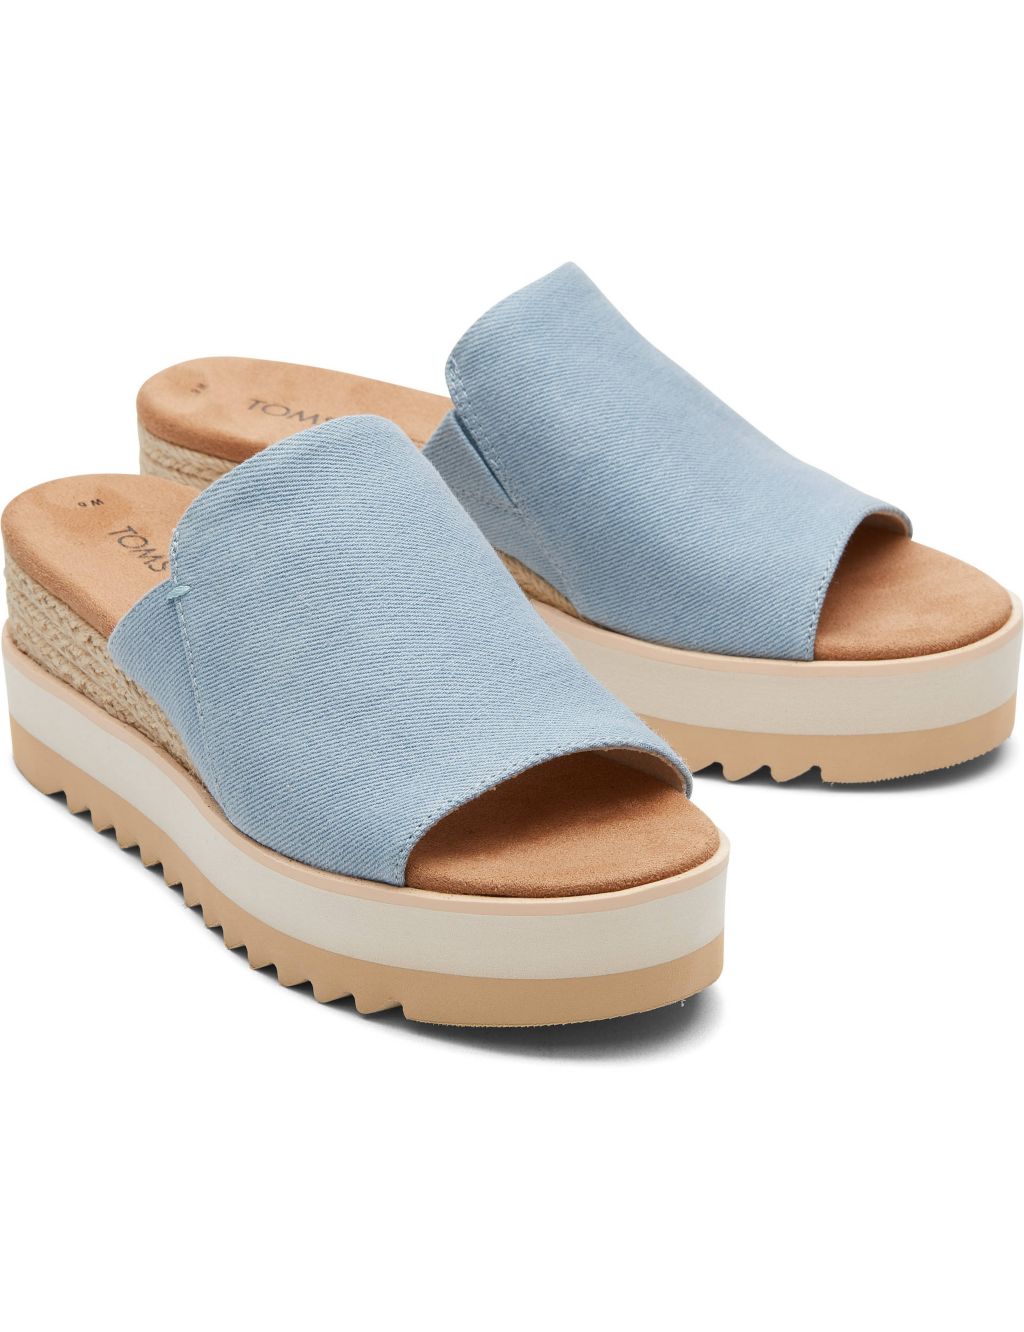 Canvas Wedge Mules image 2